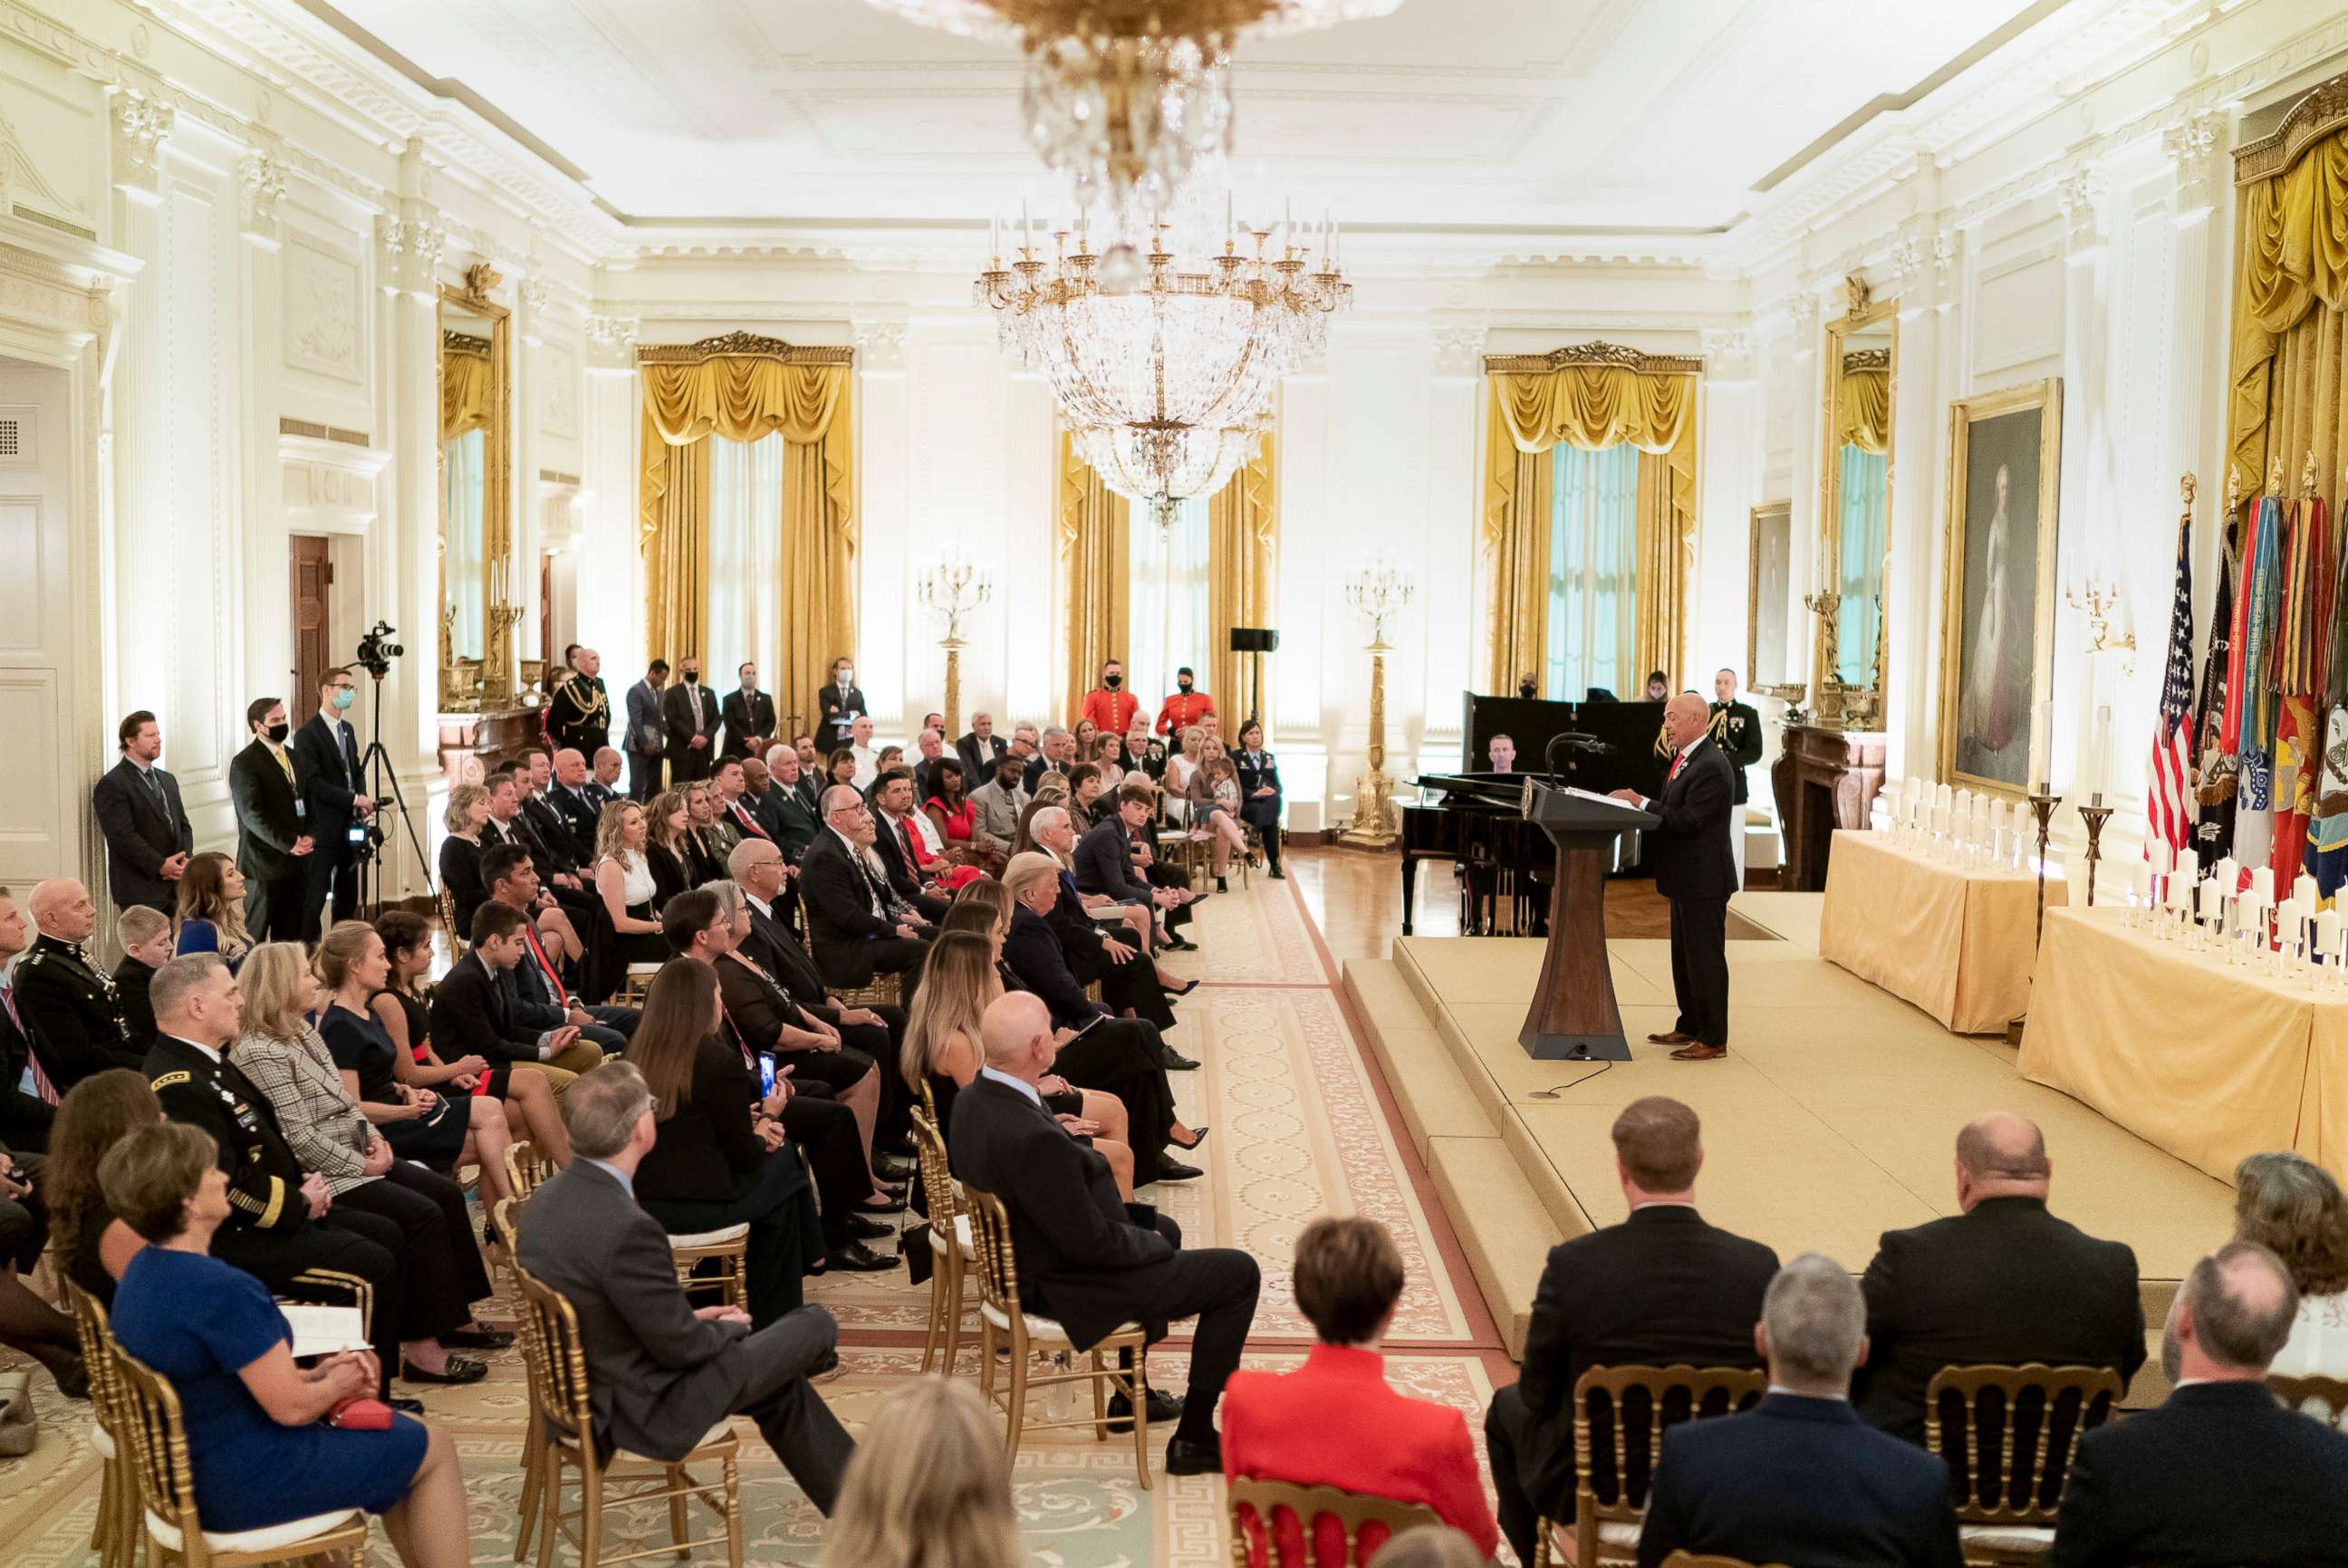 PHOTO: Gold Star father Steven Xiarhos of Yarmouth, Mass., gives remarks at a reception to honor Gold Star Families, Sept. 27, 2020, in the East Room of the White House, with President Trump and first lady Melania Trump in attendance.